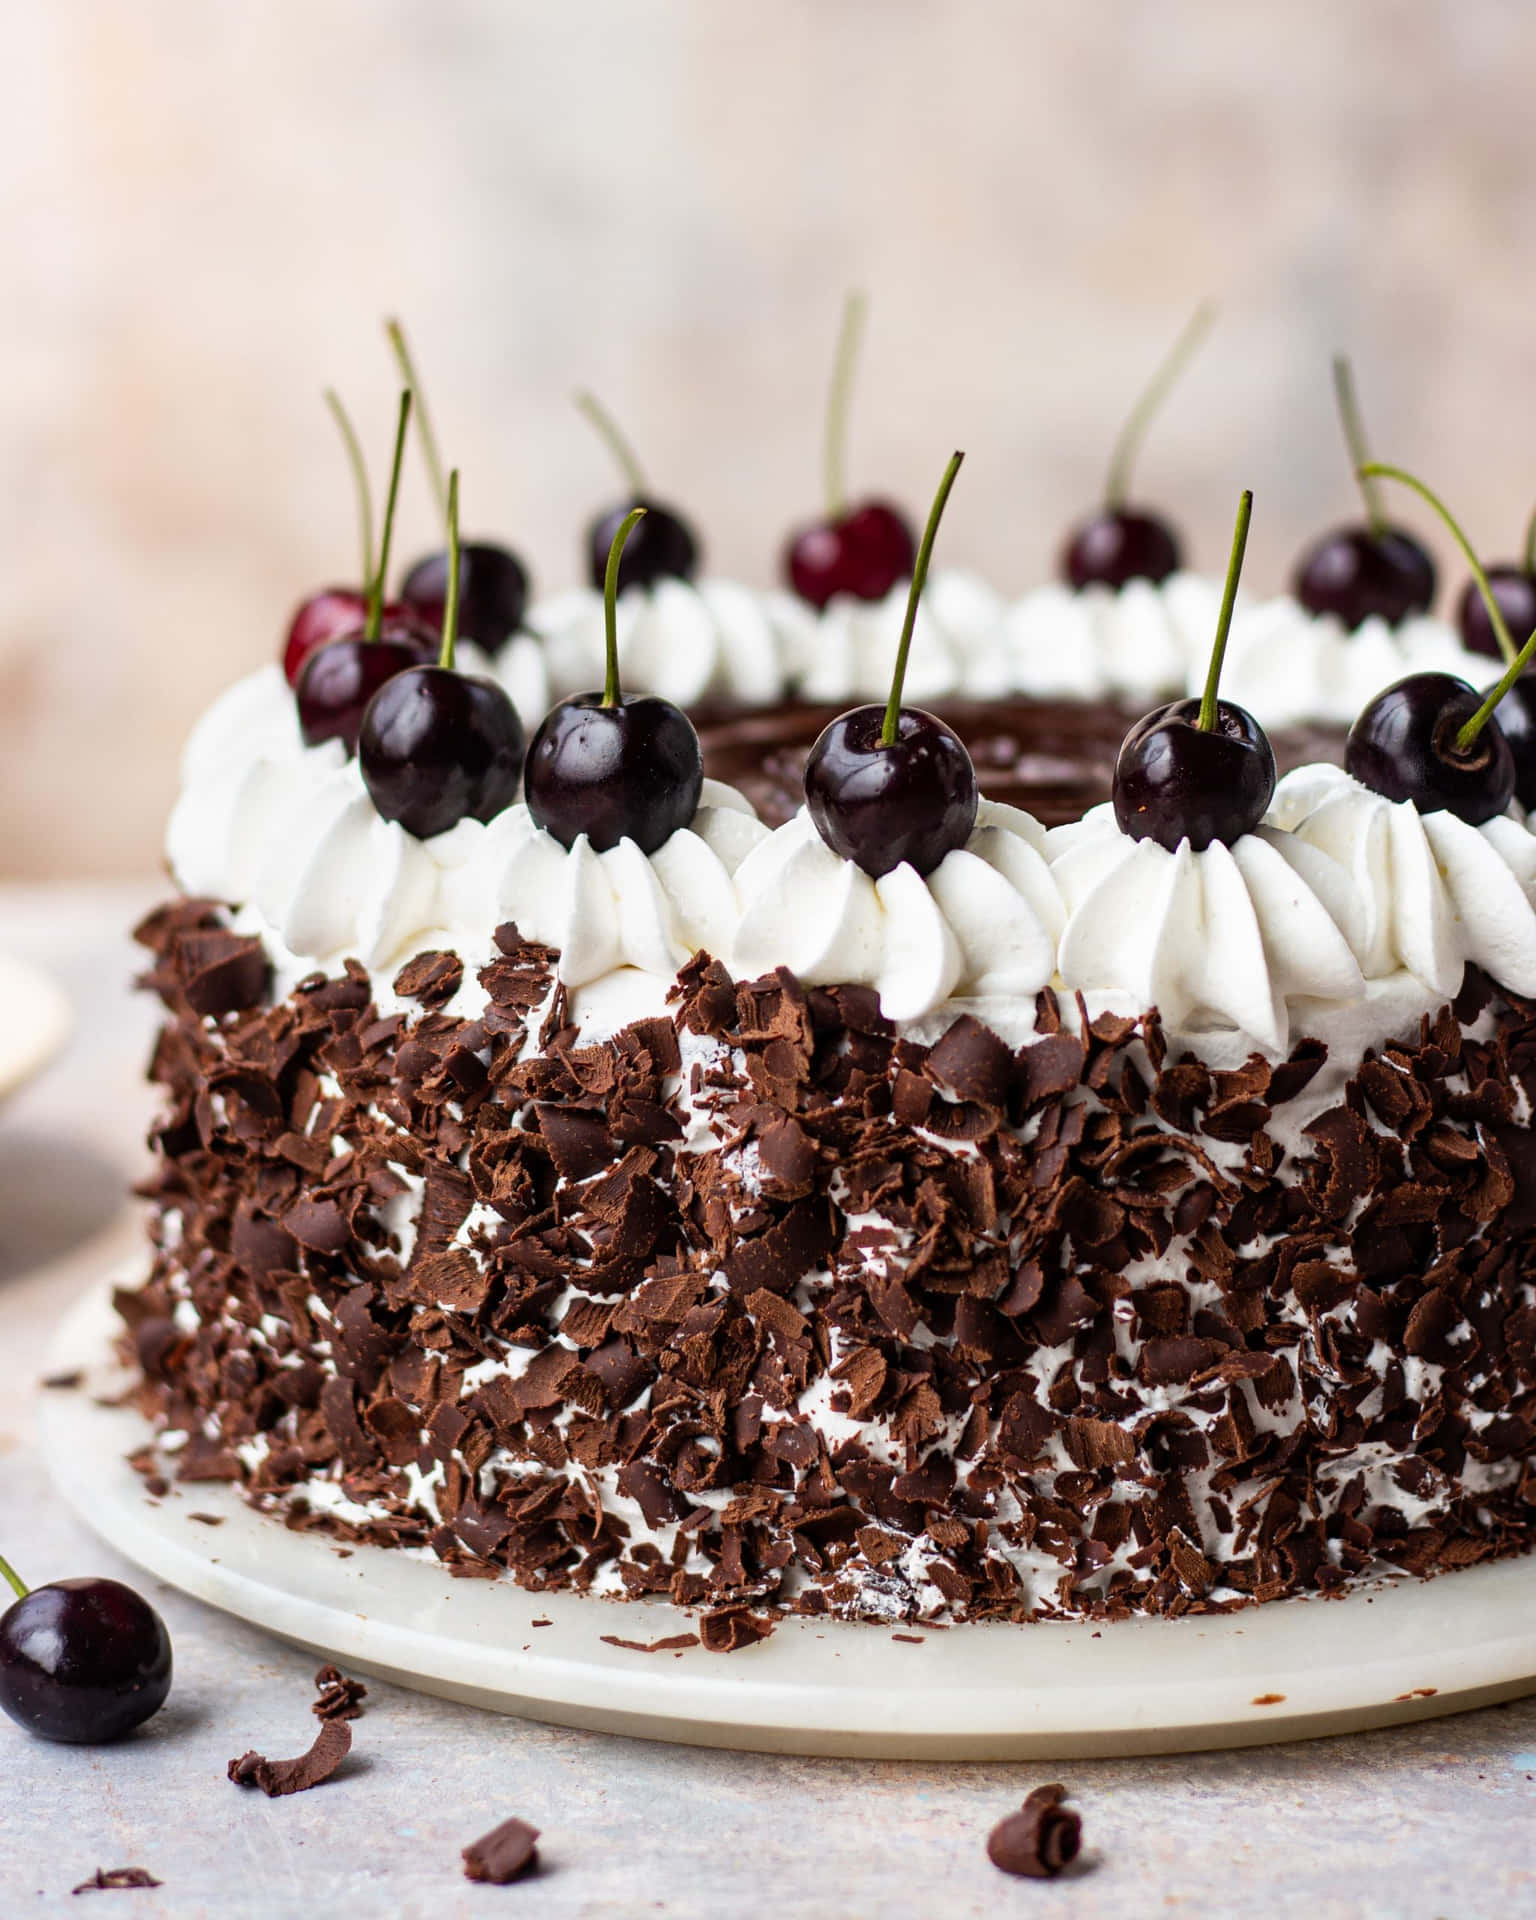 Enjoy a delicious and decadent black forest cake Wallpaper